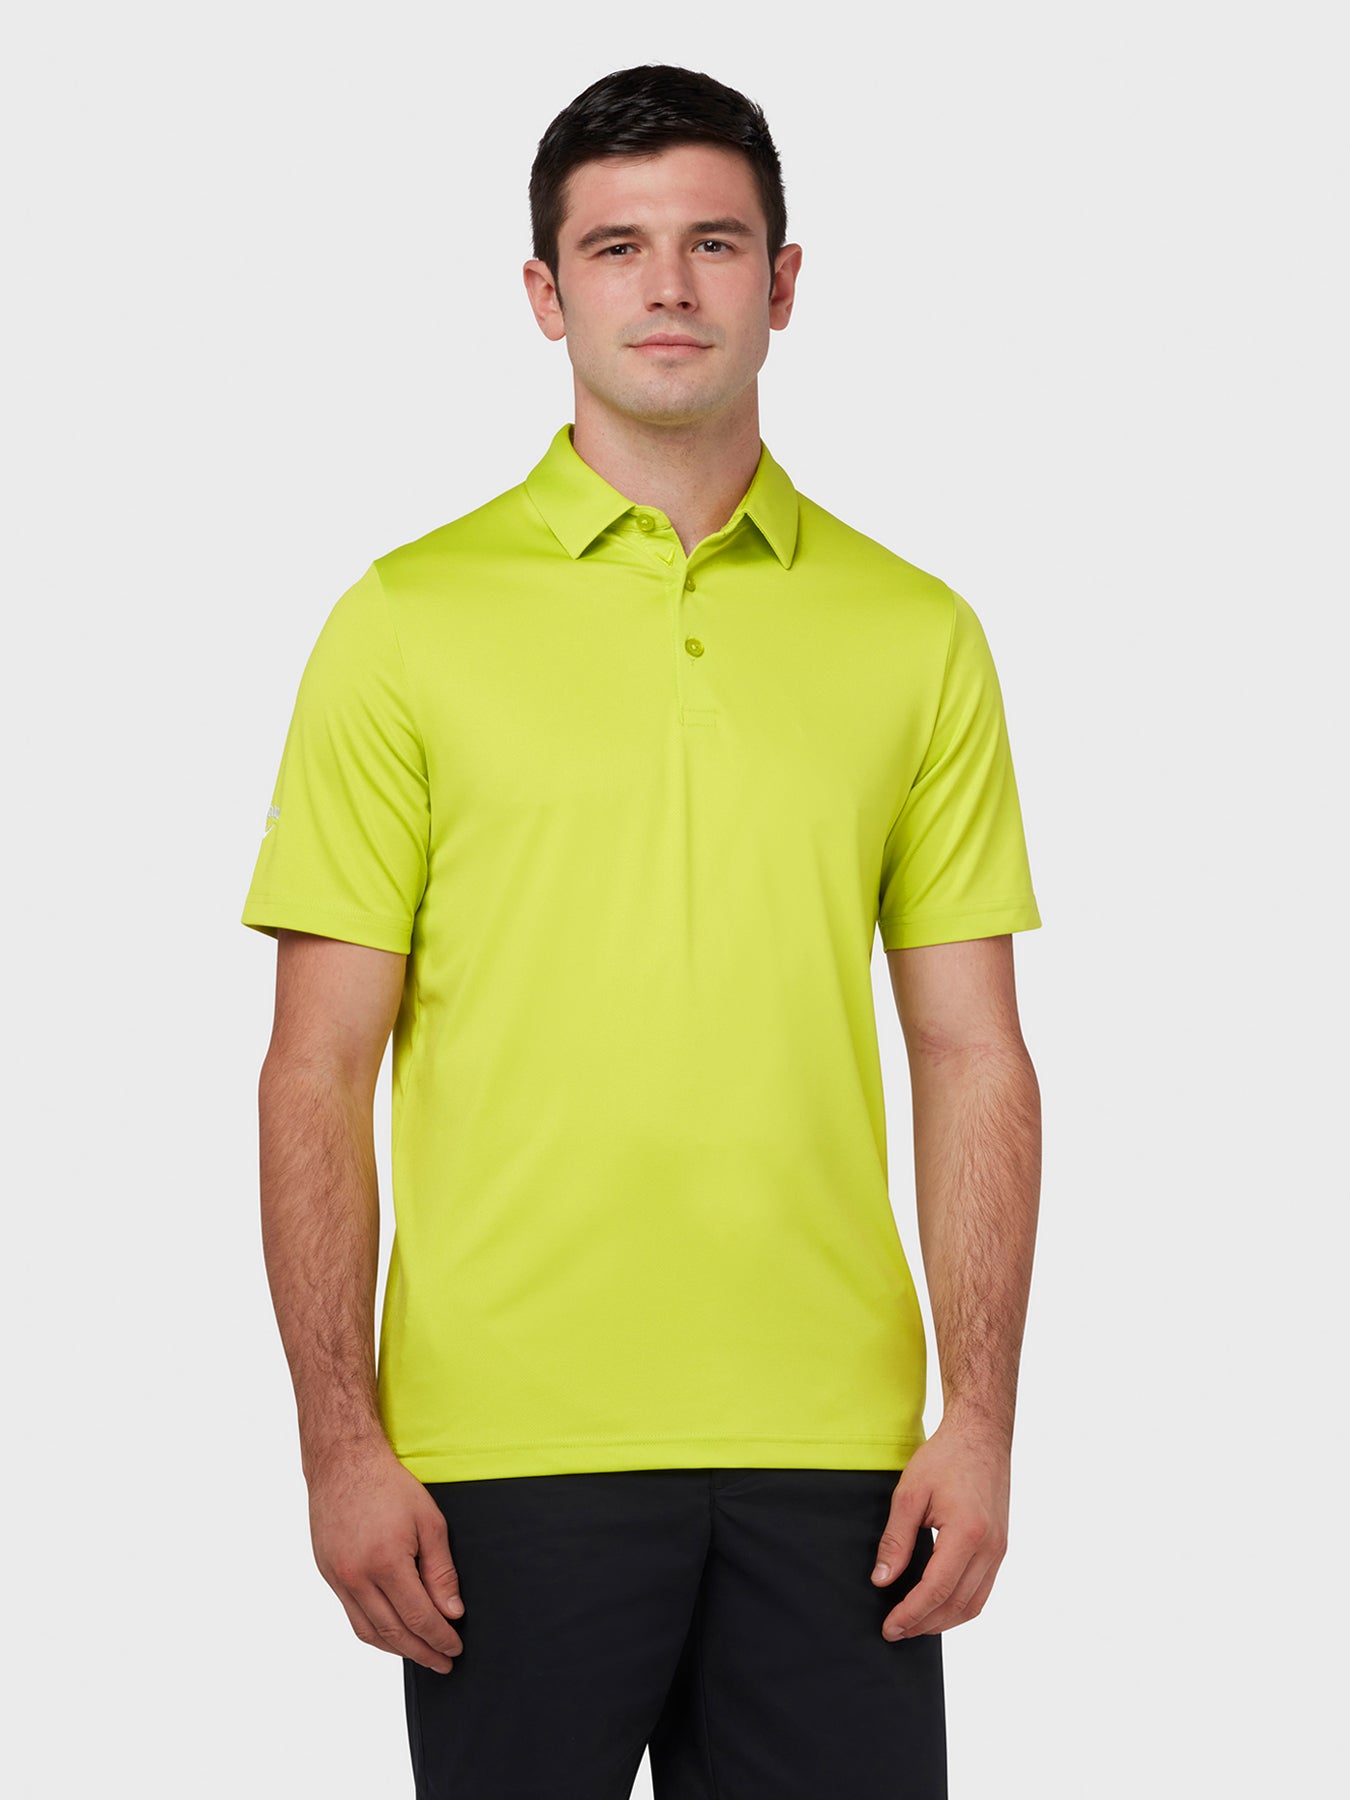 View Swing Tech Tour Polo In Surreal Green Surreal Green S information